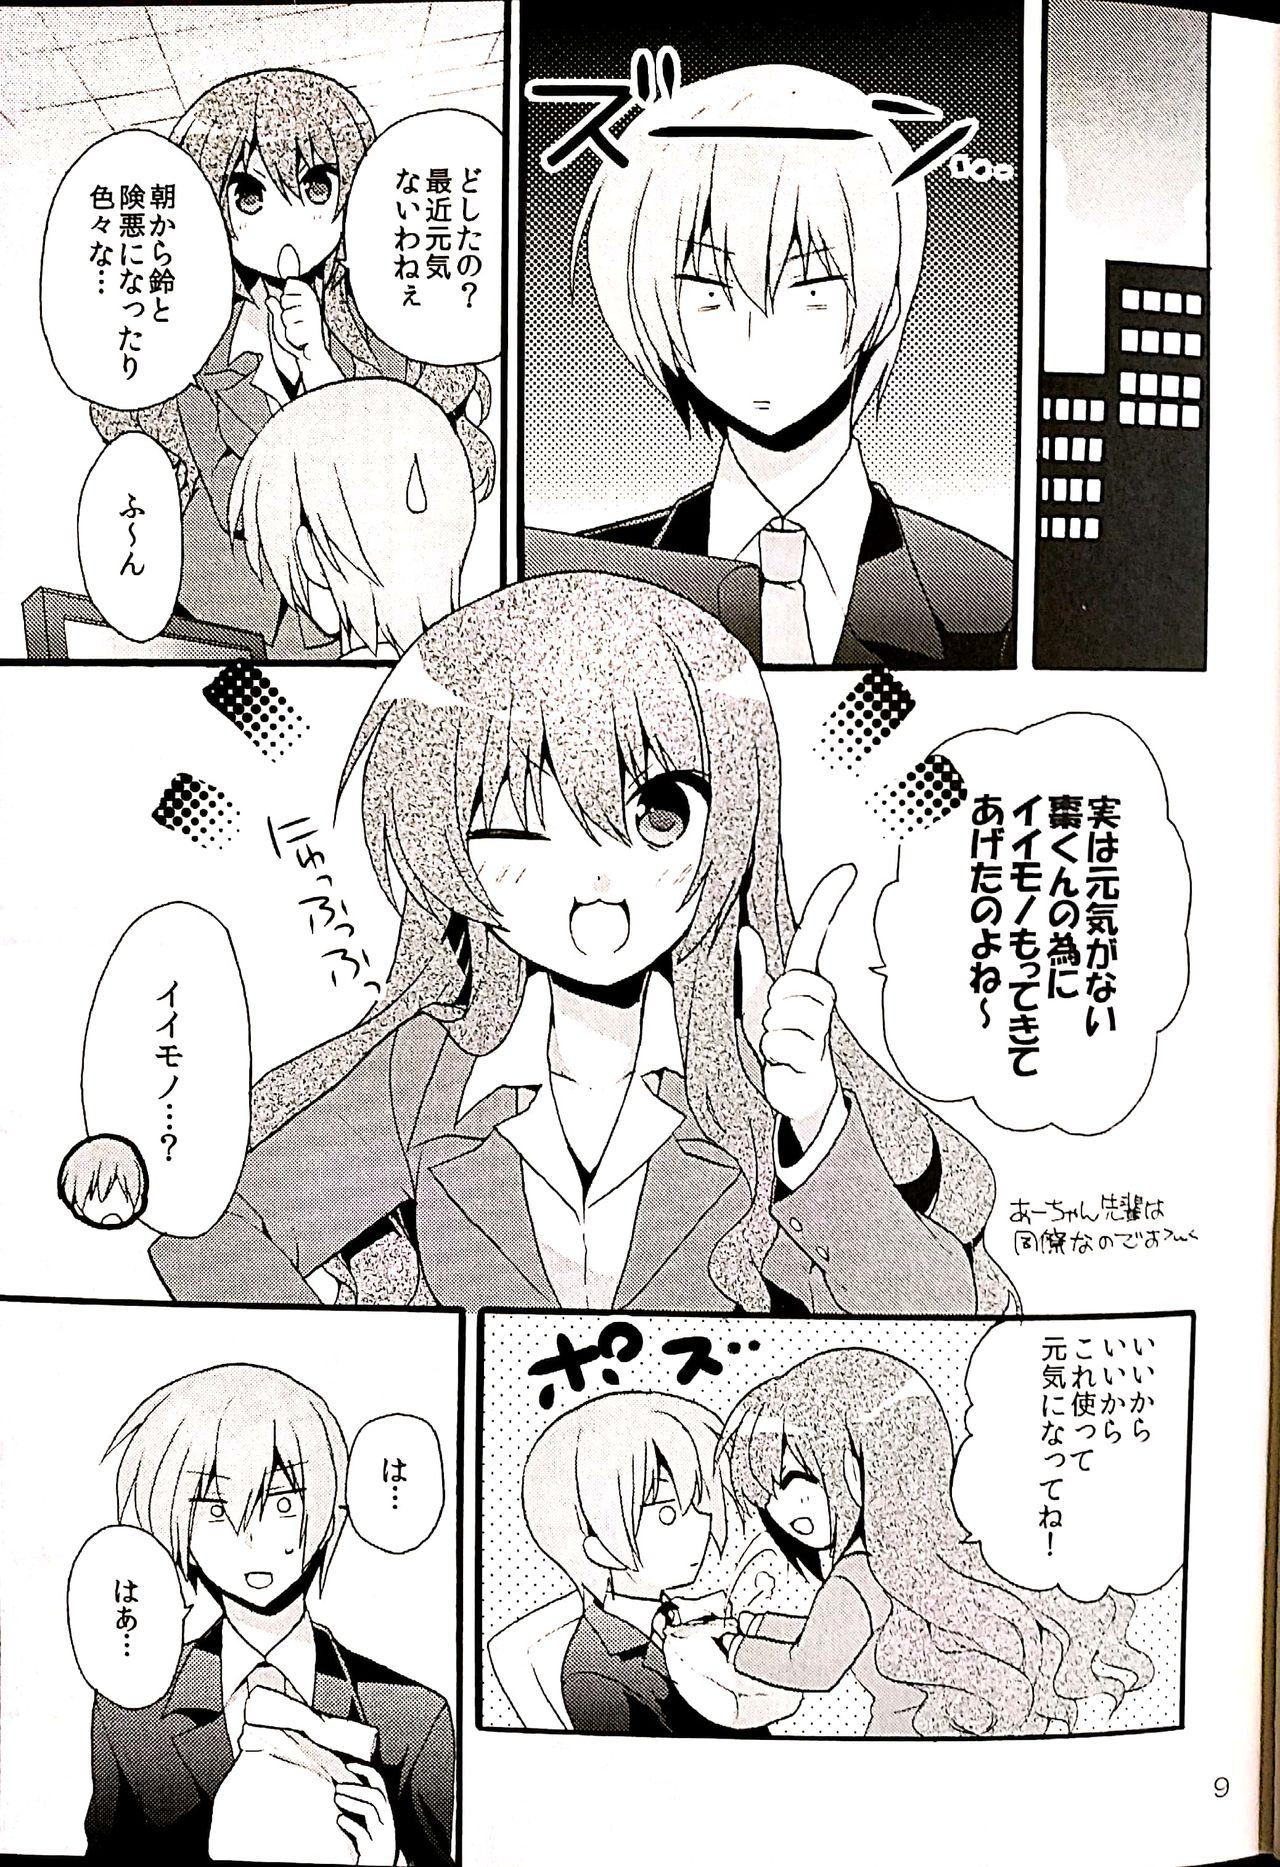 Loira Sister Complex! - Little busters Submissive - Page 6